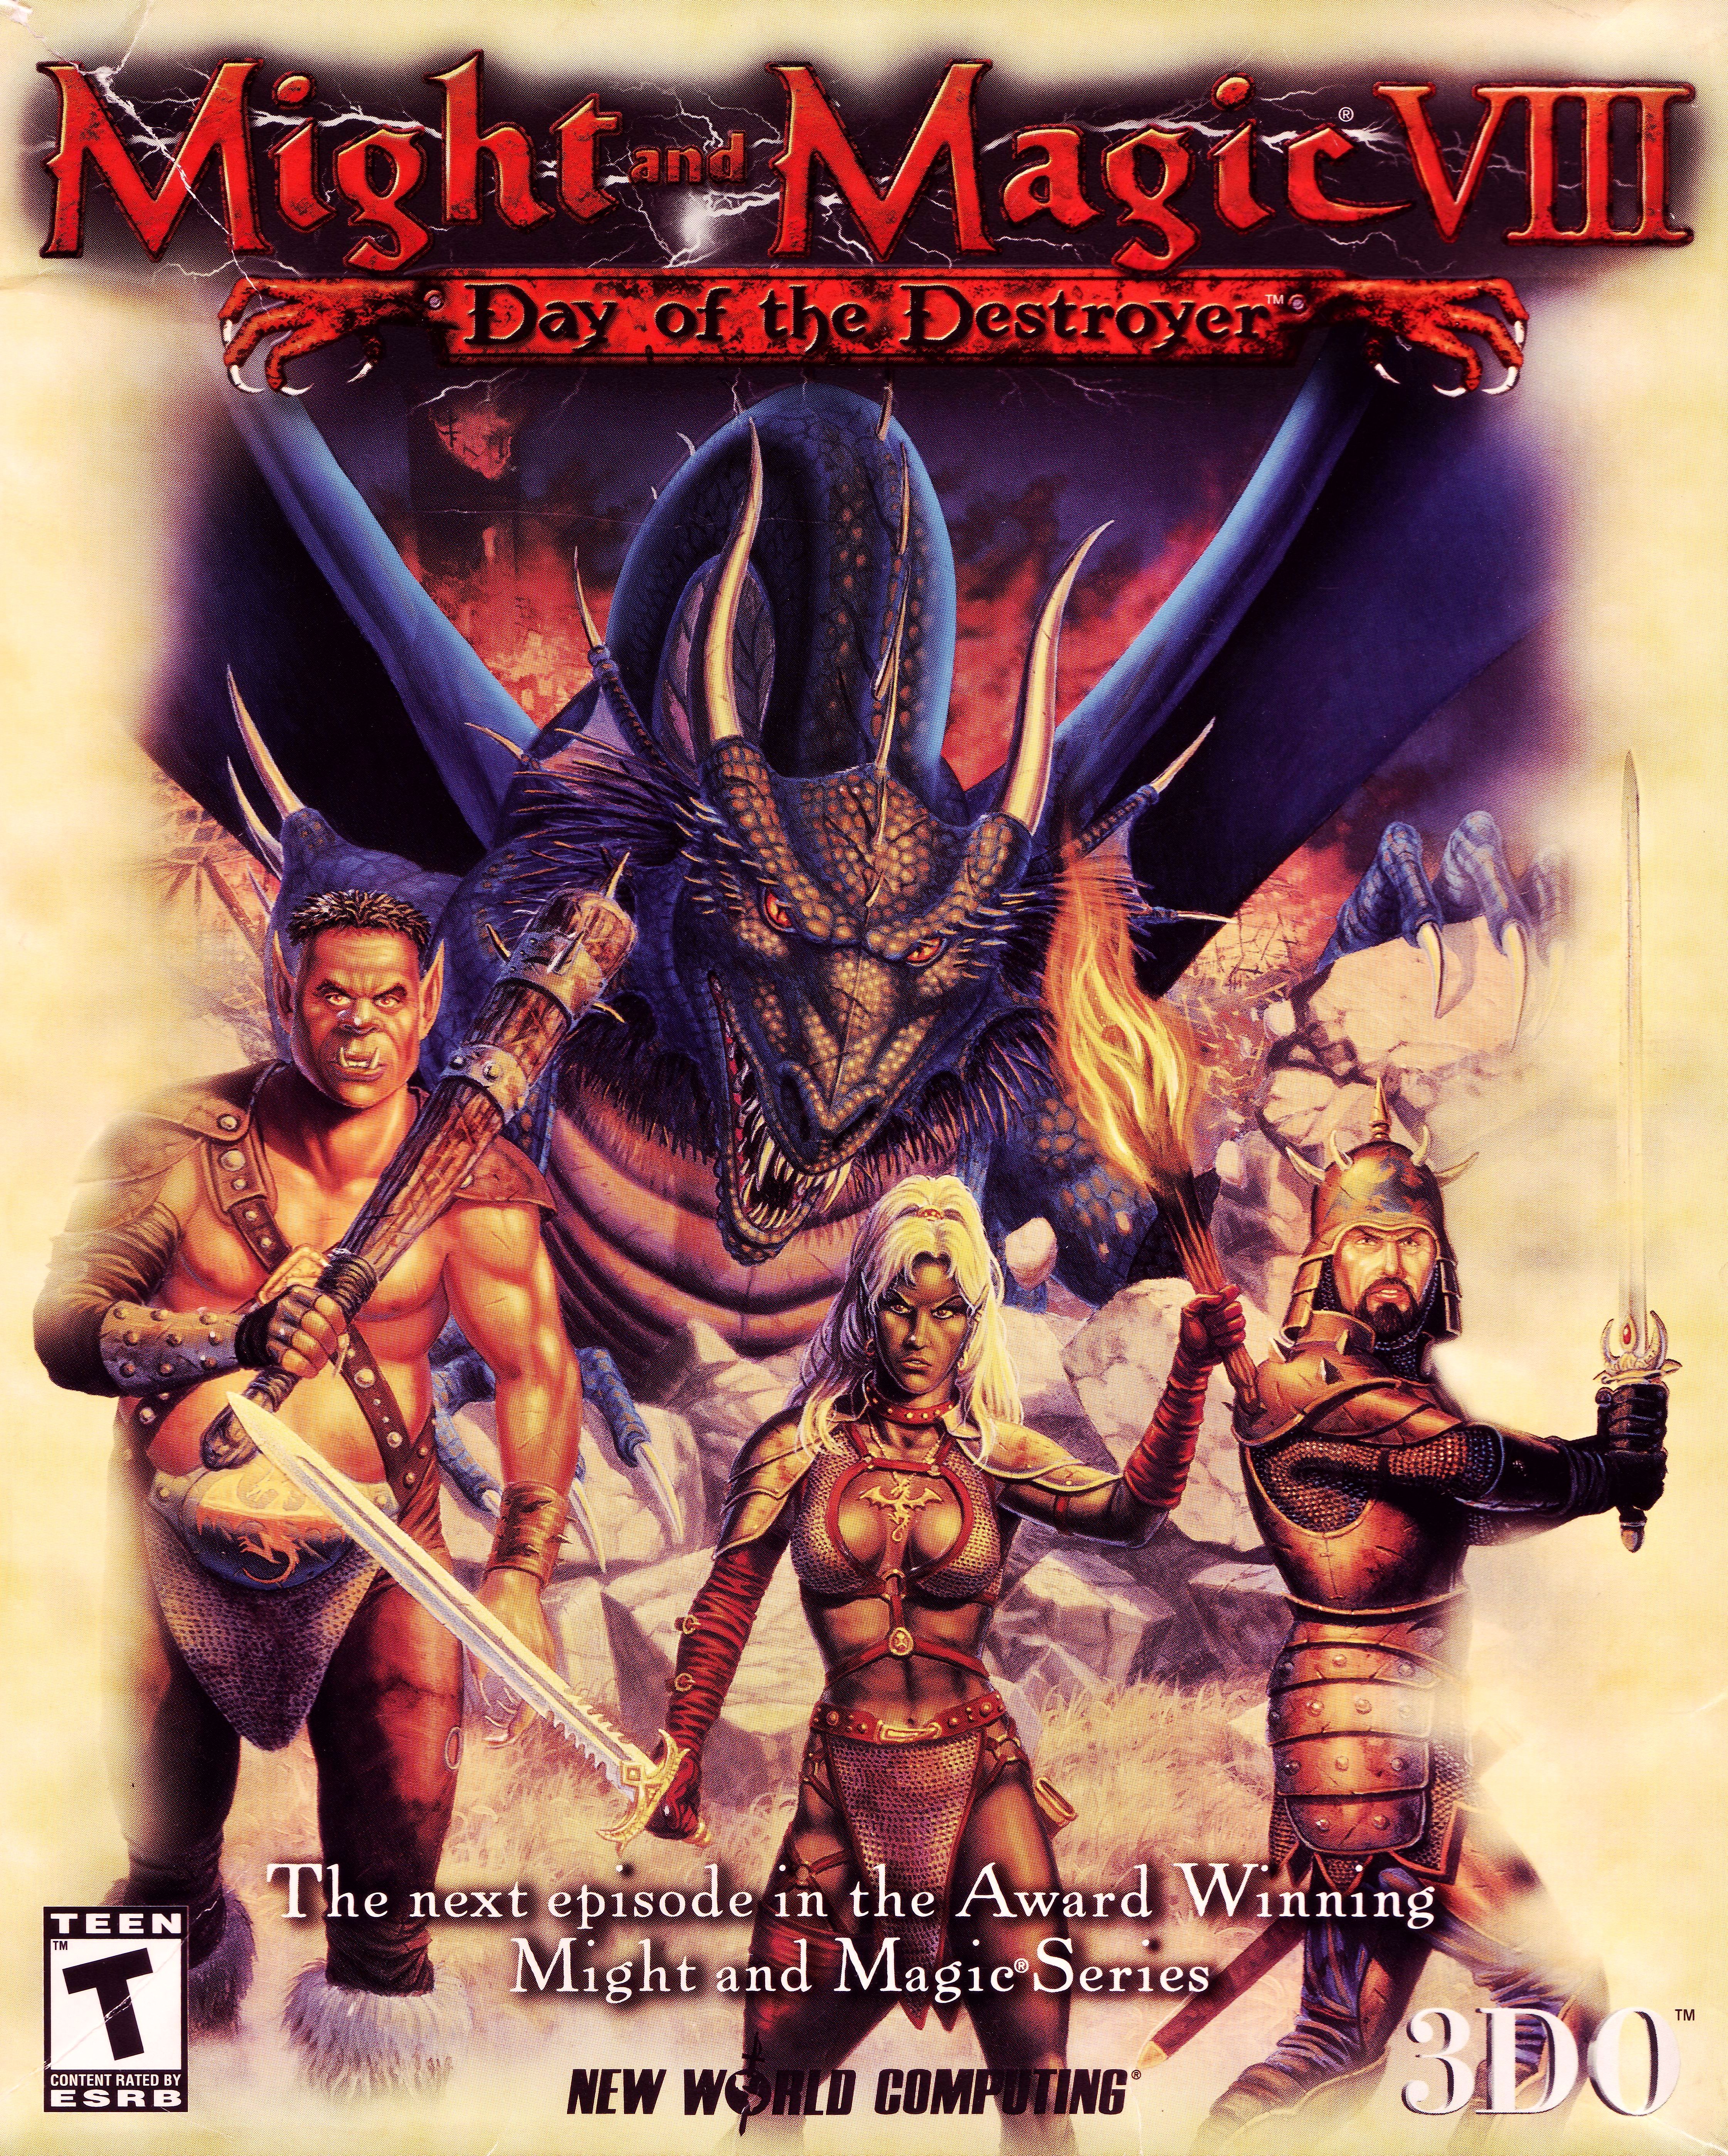 Might and magic day of the destroyer. Might and Magic VIII: Day of the Destroyer обложка. Меч и магия 8 эпоха разрушителя. Might and Magic 2000. Might and Magic 8 Cover.